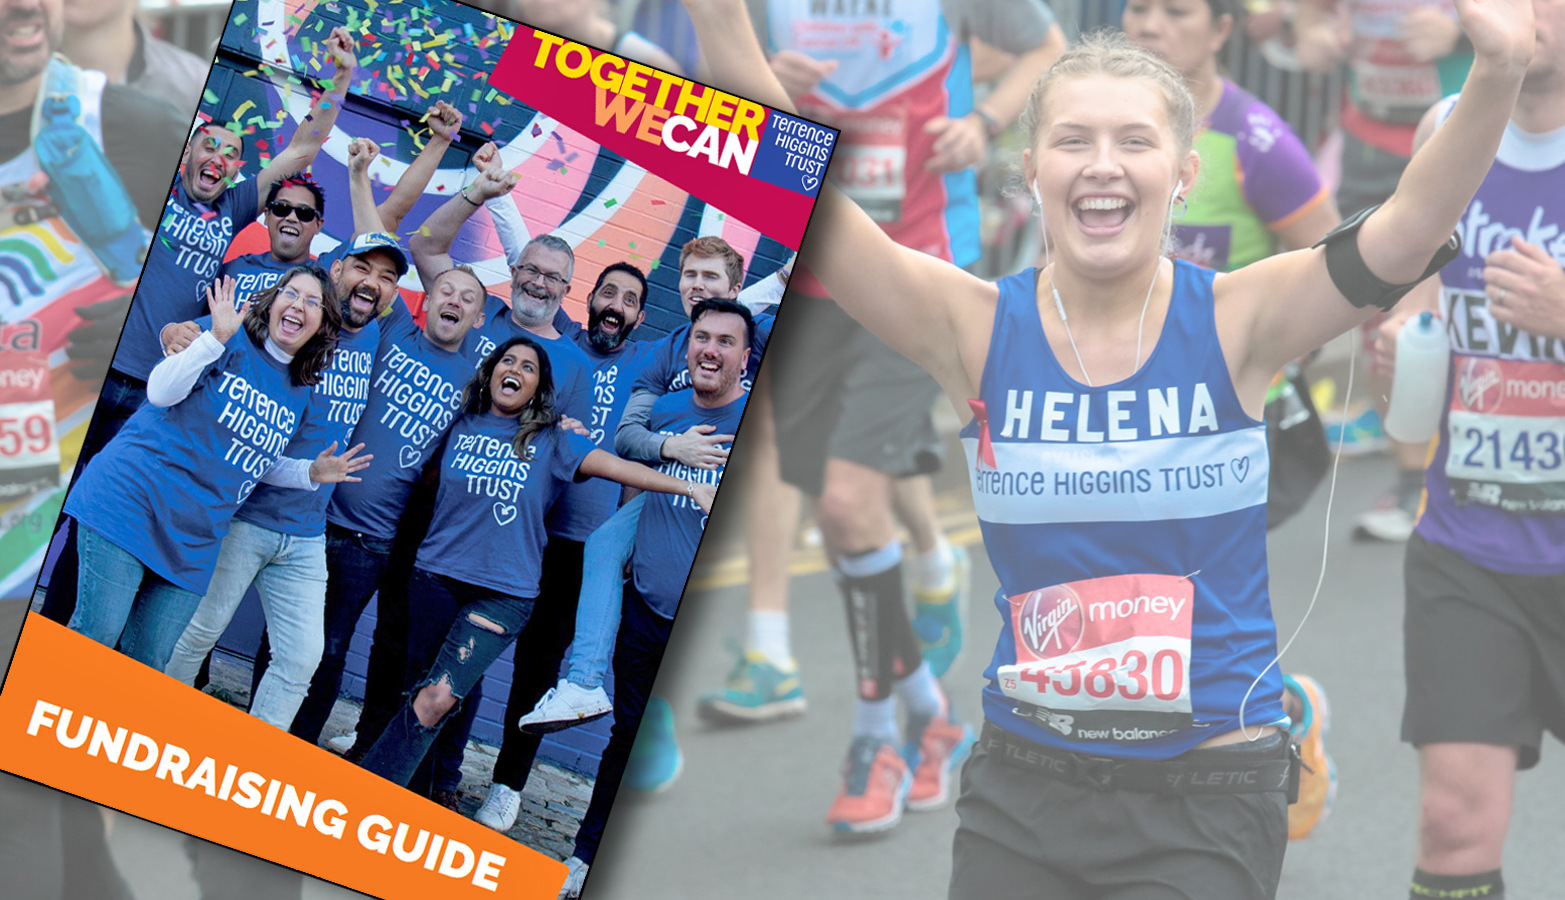 Fundraising guide front cover in front of marathon runners